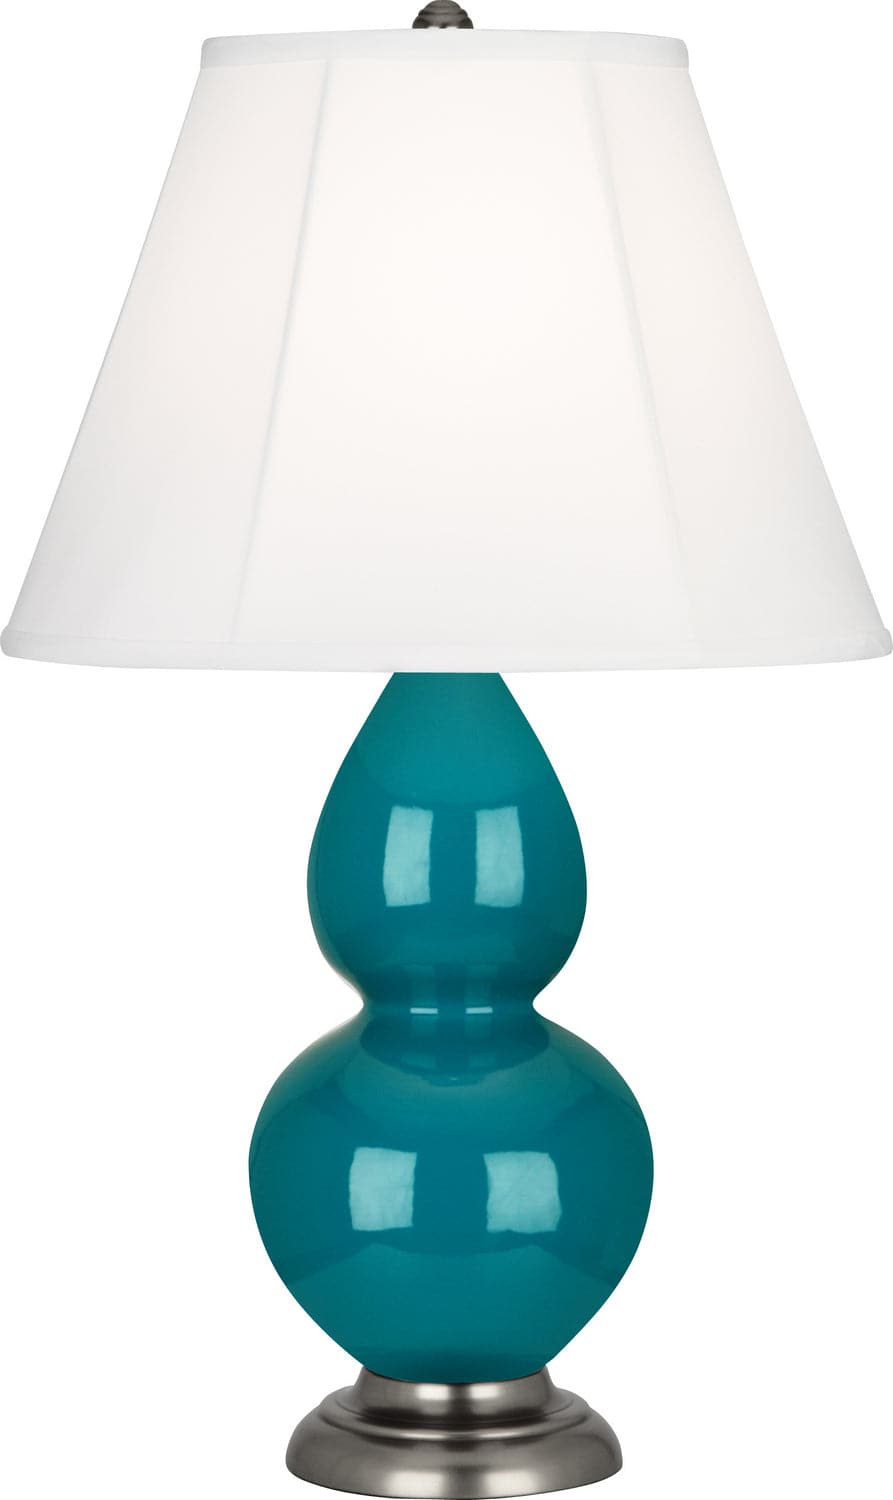 Robert Abbey - 1773 - One Light Accent Lamp - Small Double Gourd - Peacock Glazed